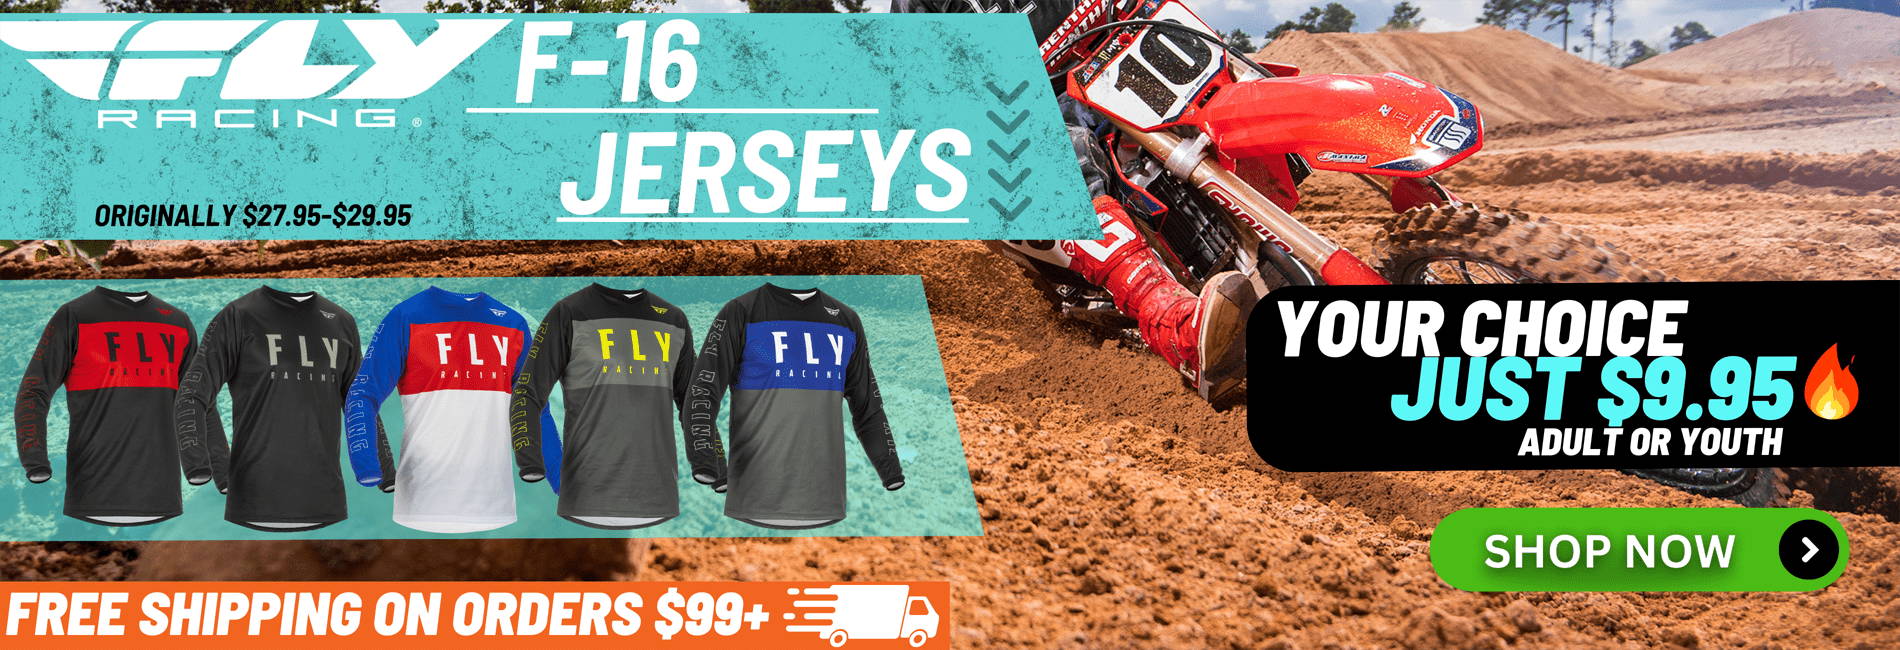 Fly Racing F-16 Jersey Sale